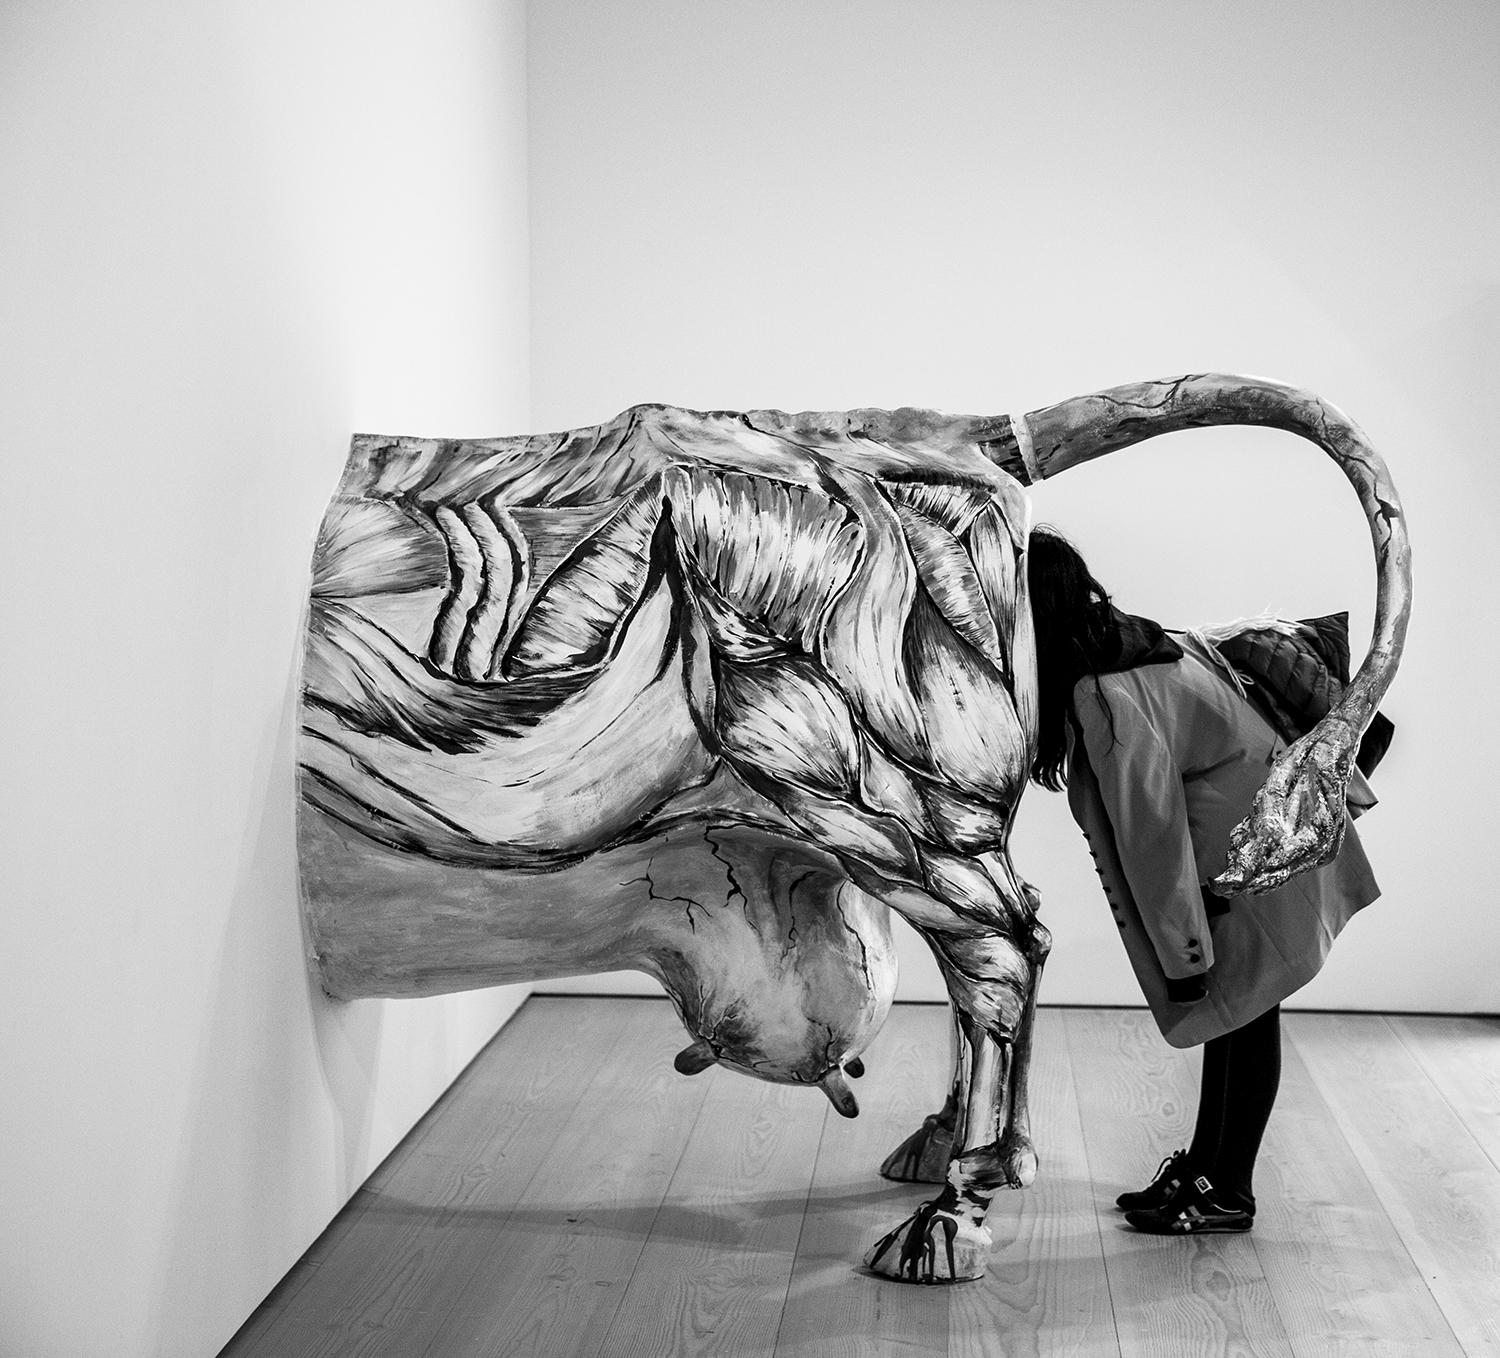 Edition of 10
signed and numbered by the artist

A women looks in to a plastic of a cow. This photo was taken in a Museum in Berlin.

JJK is a pseudonym for one of the world's most successful photo artists.
In his series "Always in my mind", he